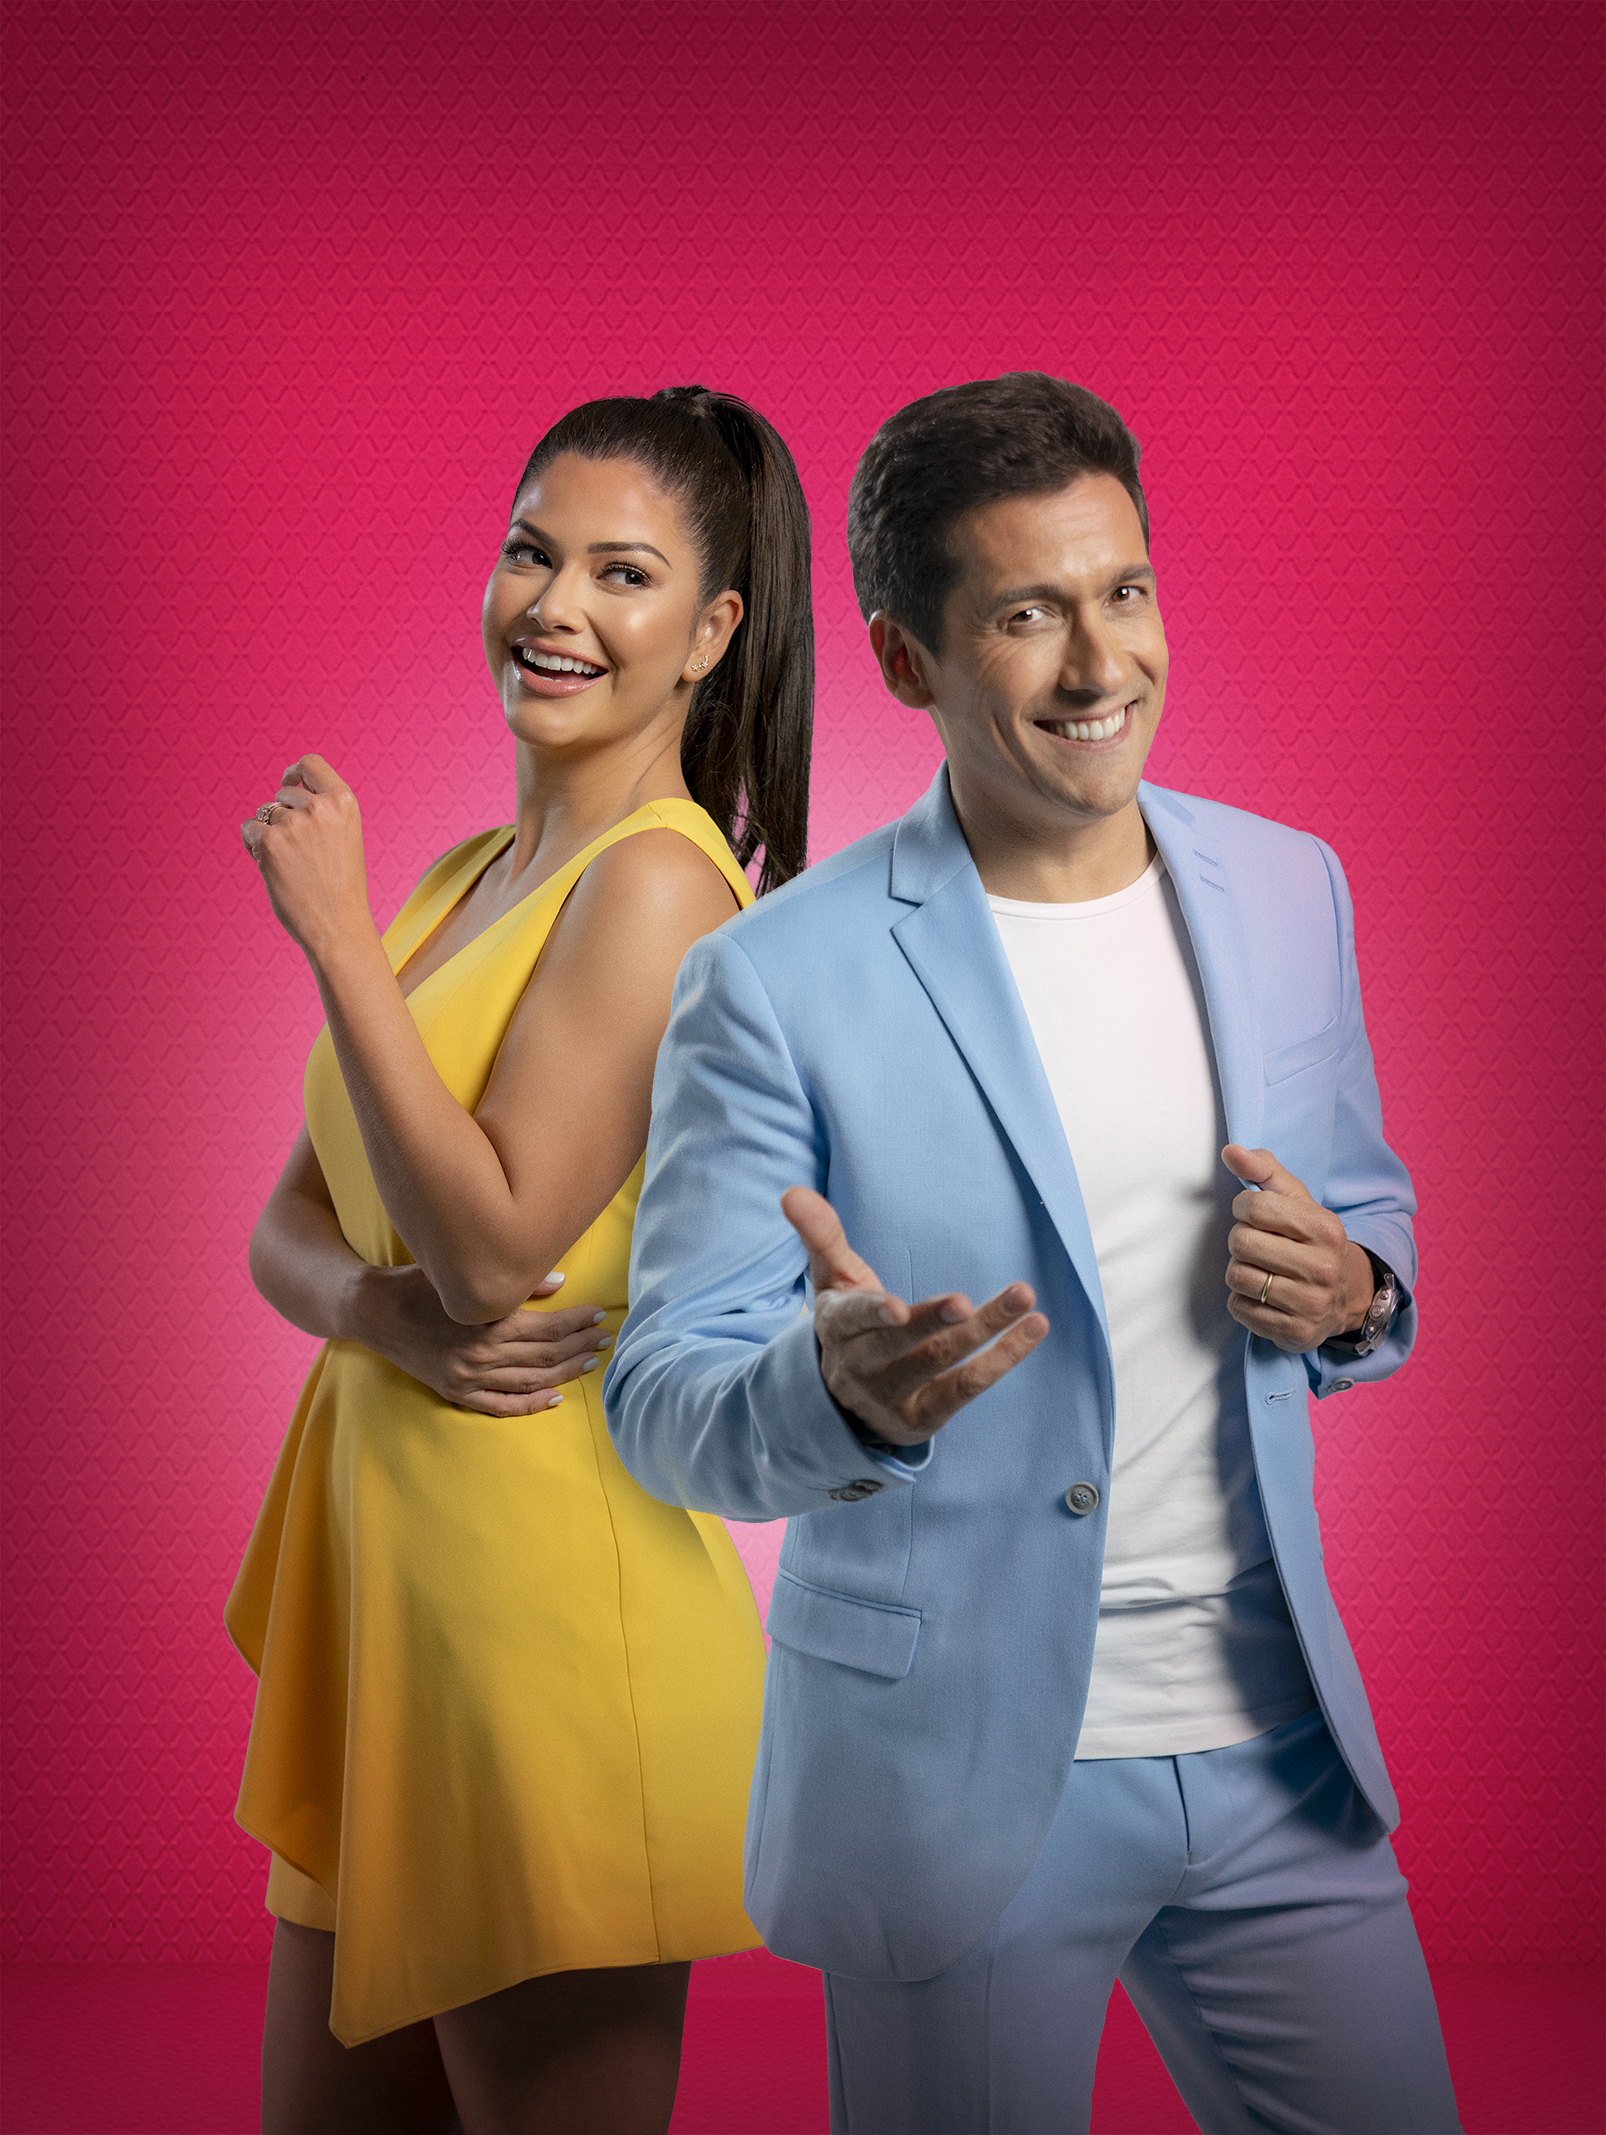 UniMás Announces Hosts of “Enamorándonos,” the Most Innovative, Live  Matchmaking Reality Show of the Fall Season - TelevisaUnivision